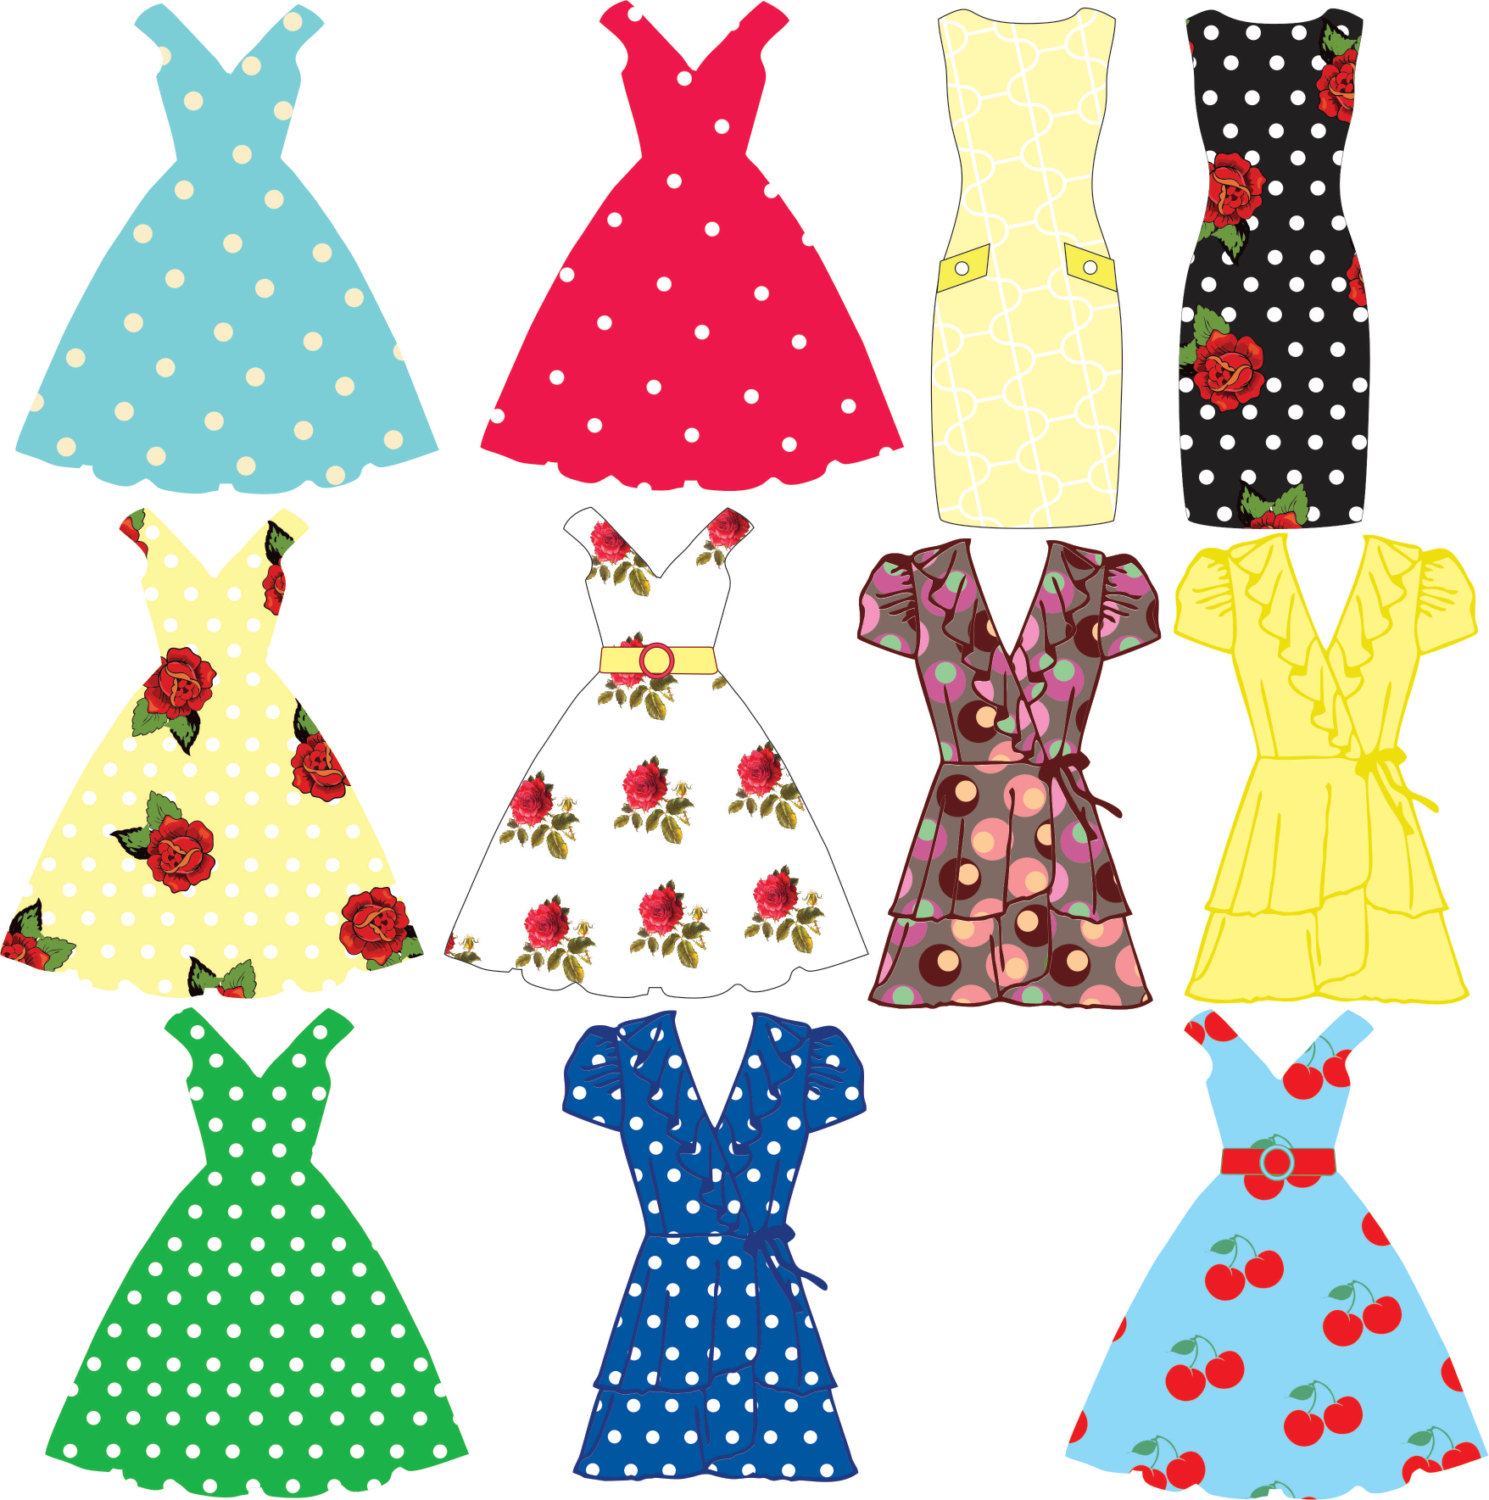 clipart of dress - photo #38